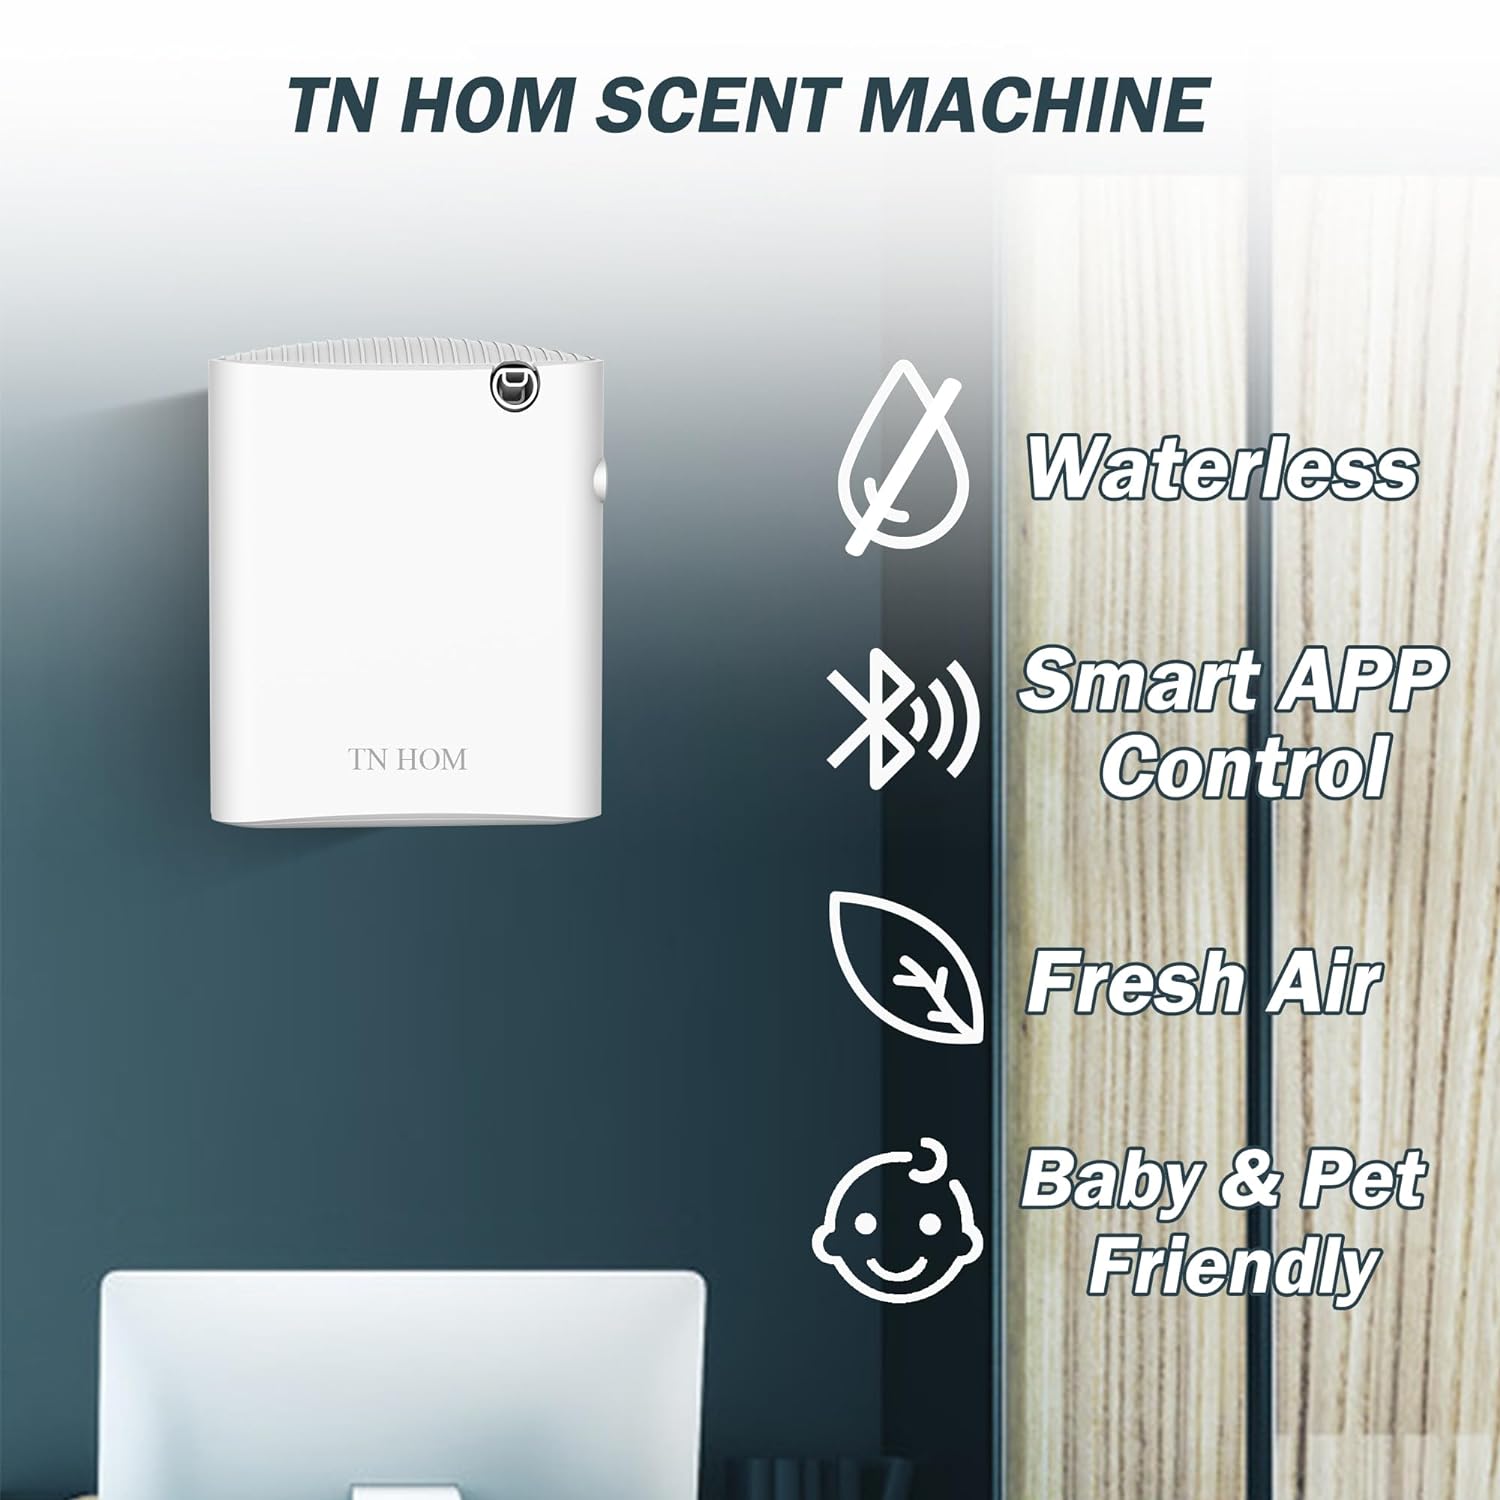 TN HOM Smart Bluetooth Scent Air Machine for Home, Cold Air Technology Waterless Essential Oil Diffuser 300ML, Scent Cover Up to 1,700 Sq. Ft - Aromatherapy Diffuser for Large Room, Office, Hotel